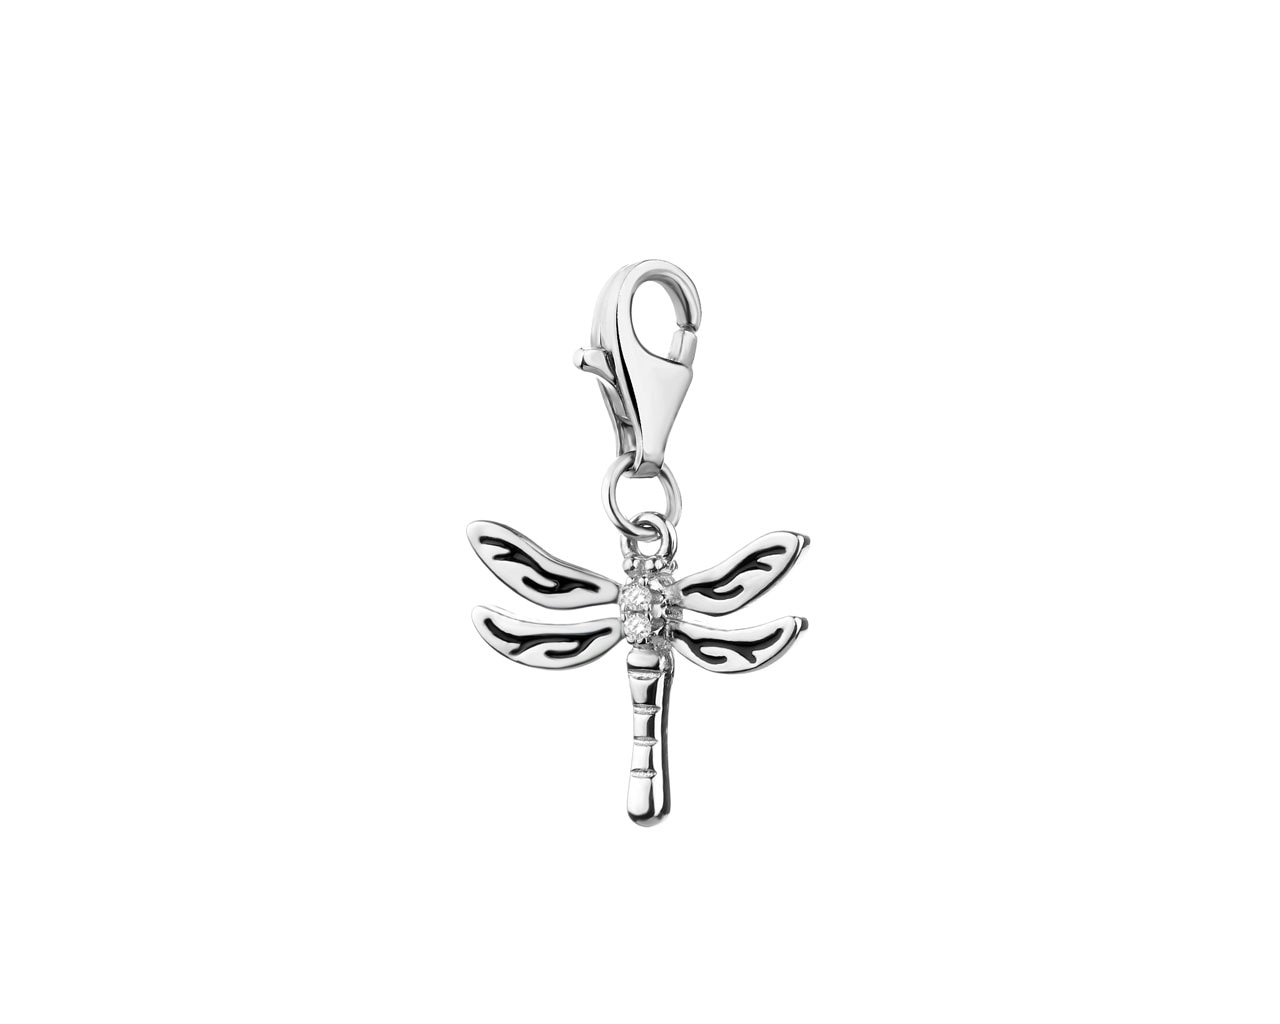 .925 Sterling Silver CZ & Enameled Dragonfly Charm Pendant